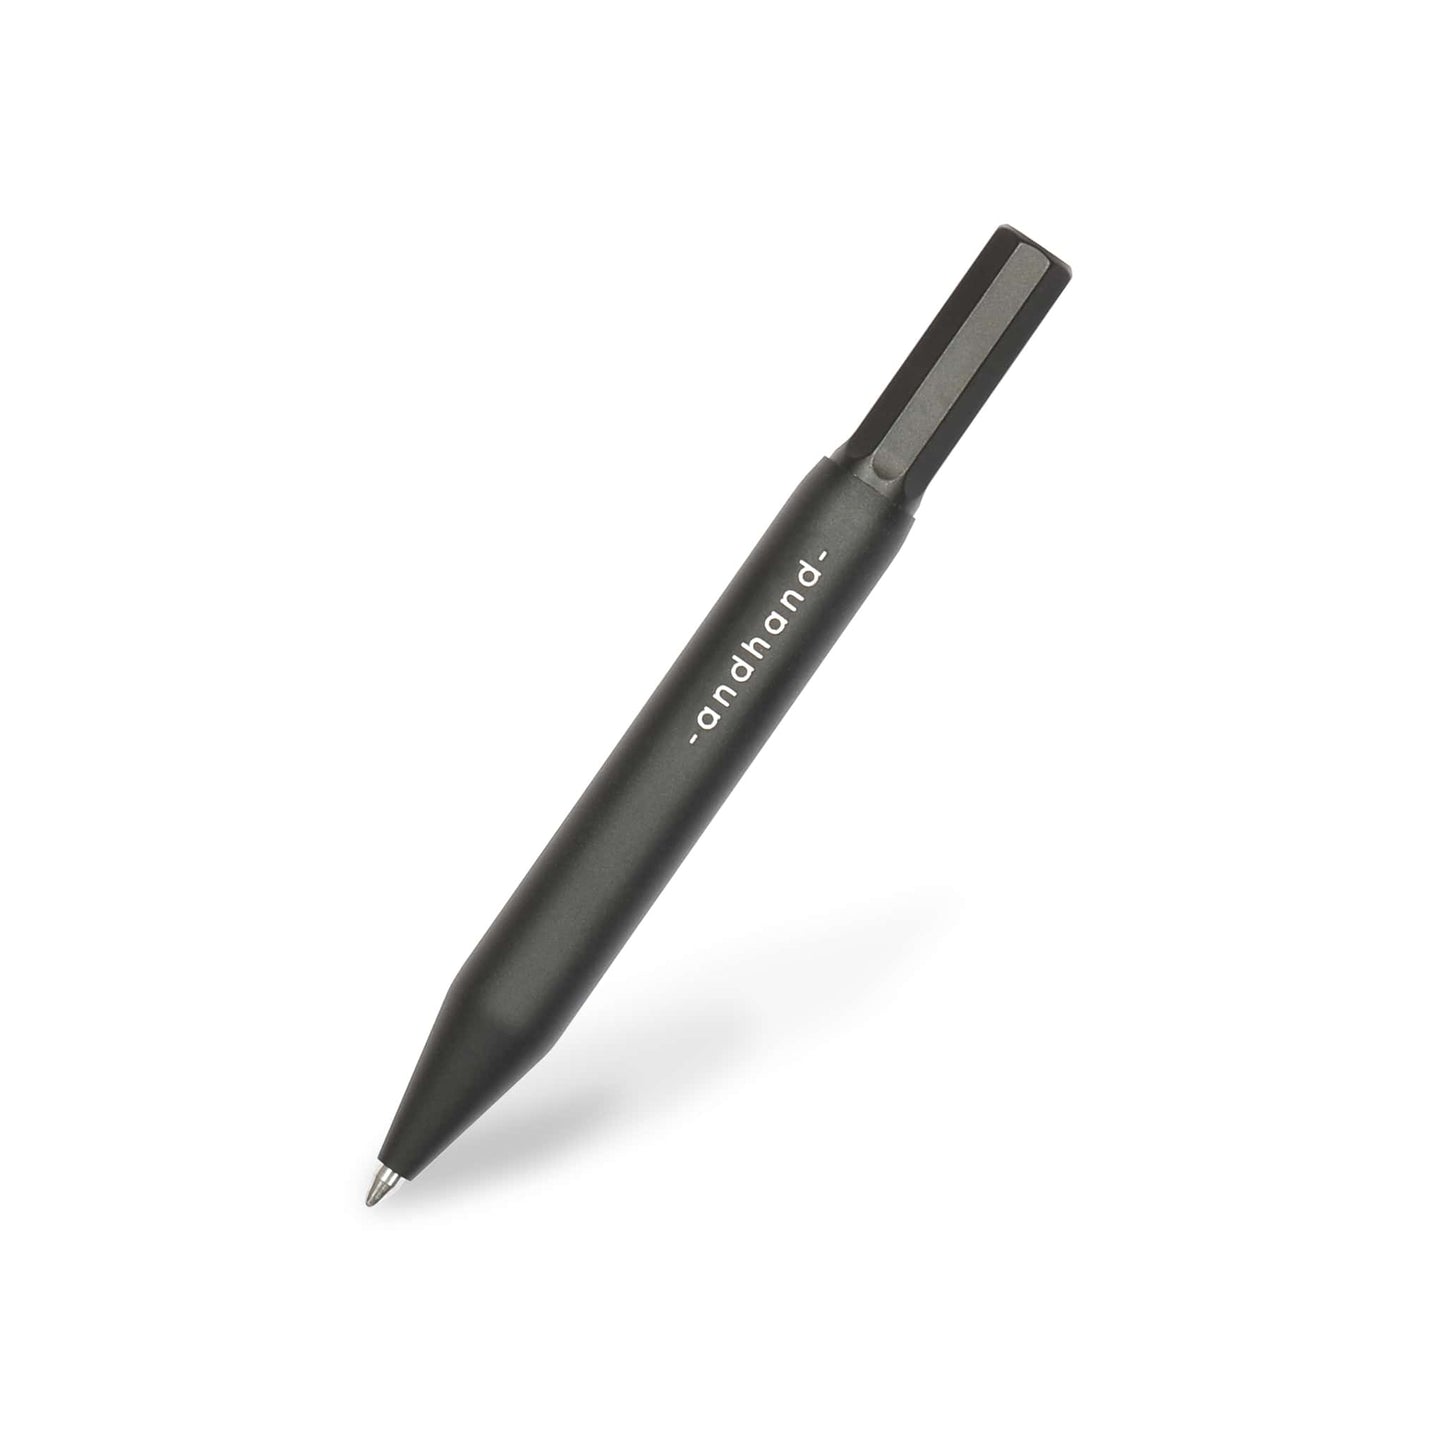 Aluminium and brass everyday carry black pen from Andhand. An expert compact writing tool with a smooth mechanism and modern minimal design. Amazingly durable and refined 4 inch pen. Shown here in black satin anodized finish.